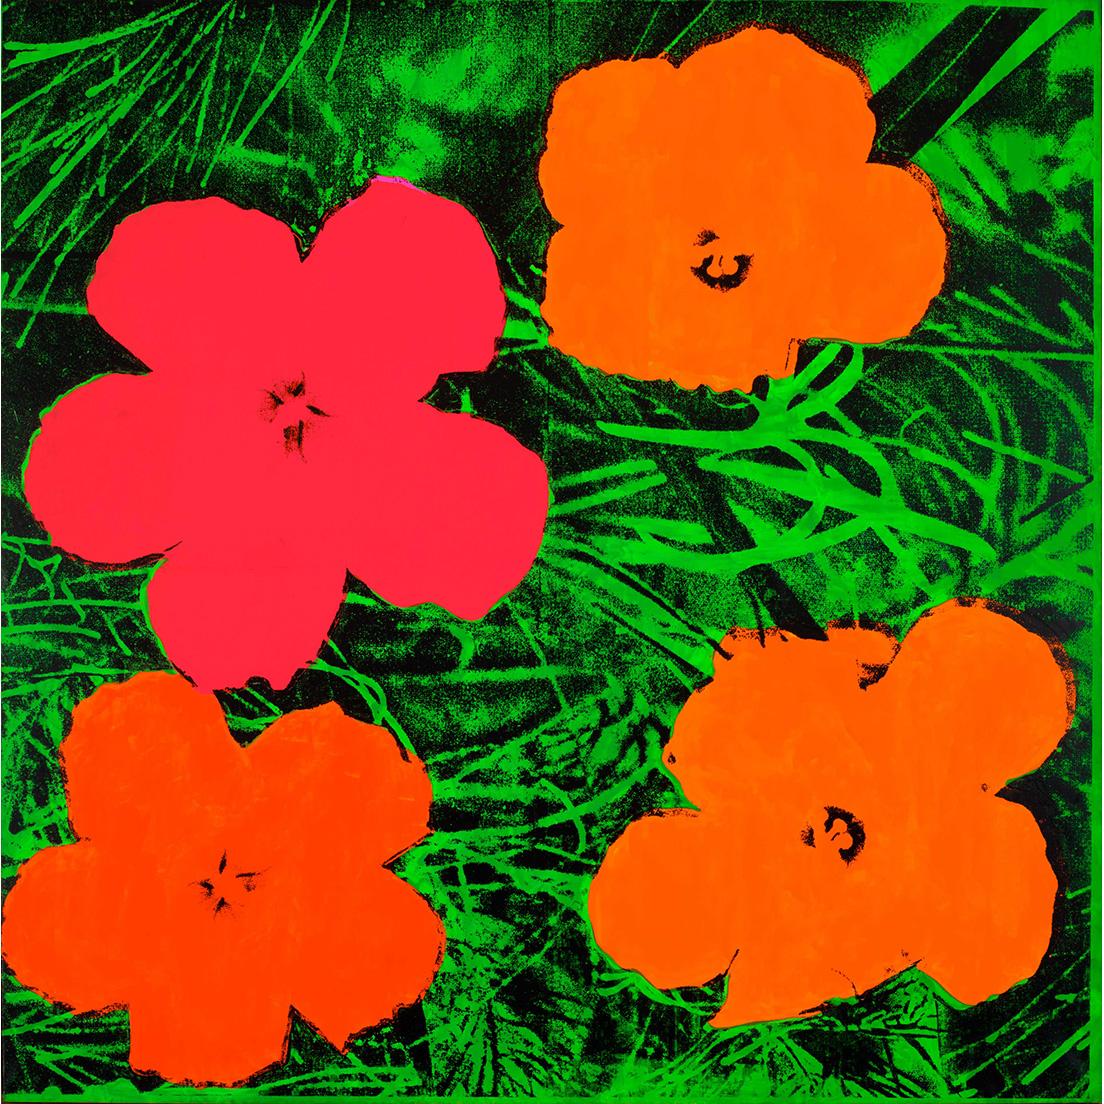 《Flowers》（1964年）Private collection　© 2020 The Andy Warhol Foundation for the Visual Arts, Inc./ Licensed by DACS, London.